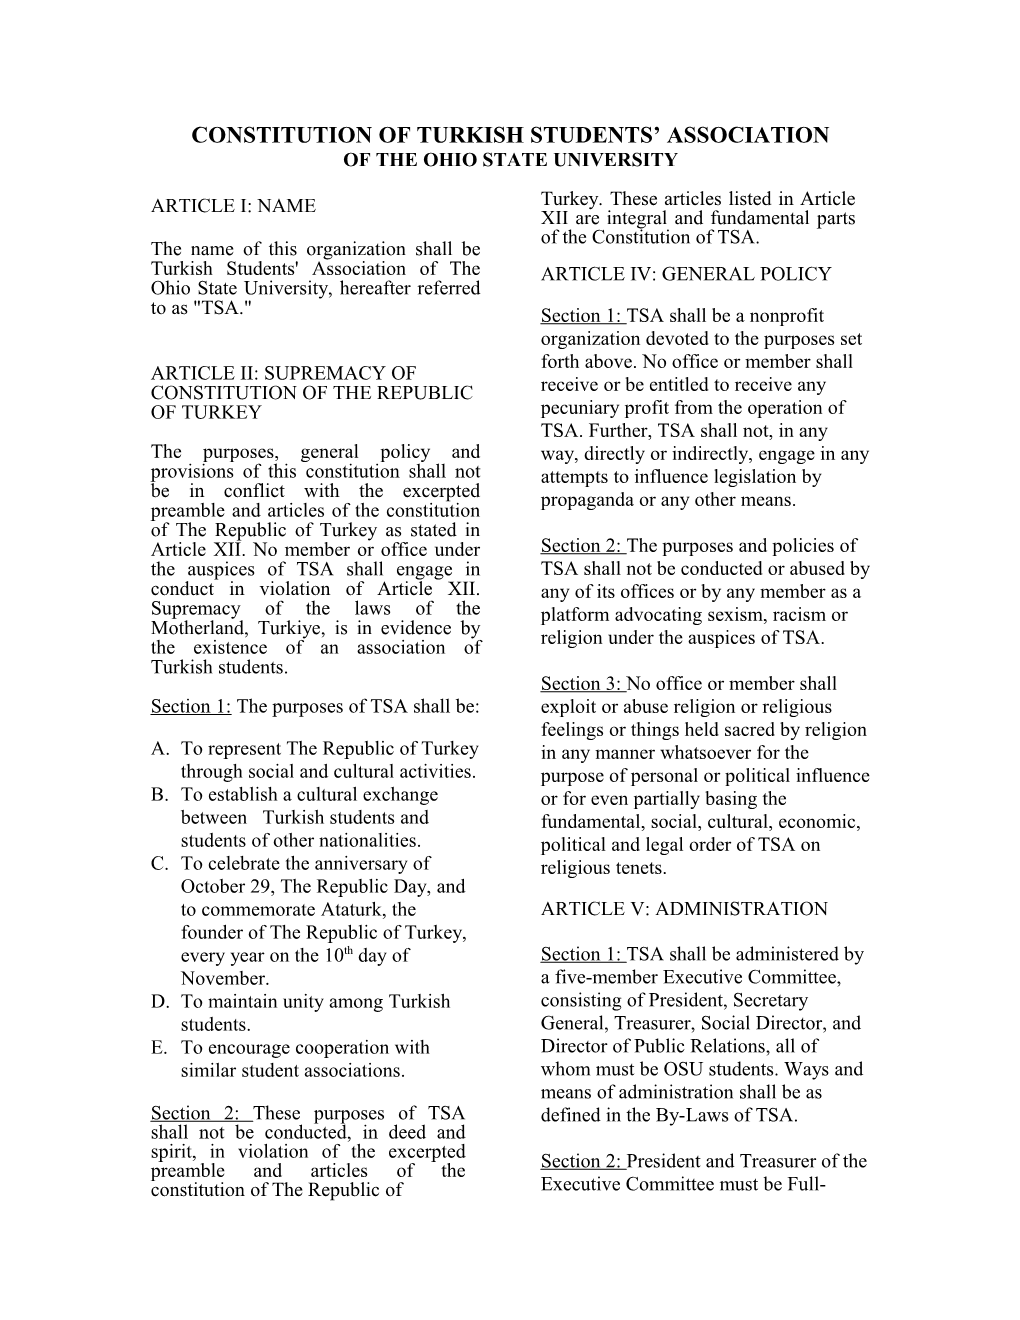 Constitution of Turkish Students' Association